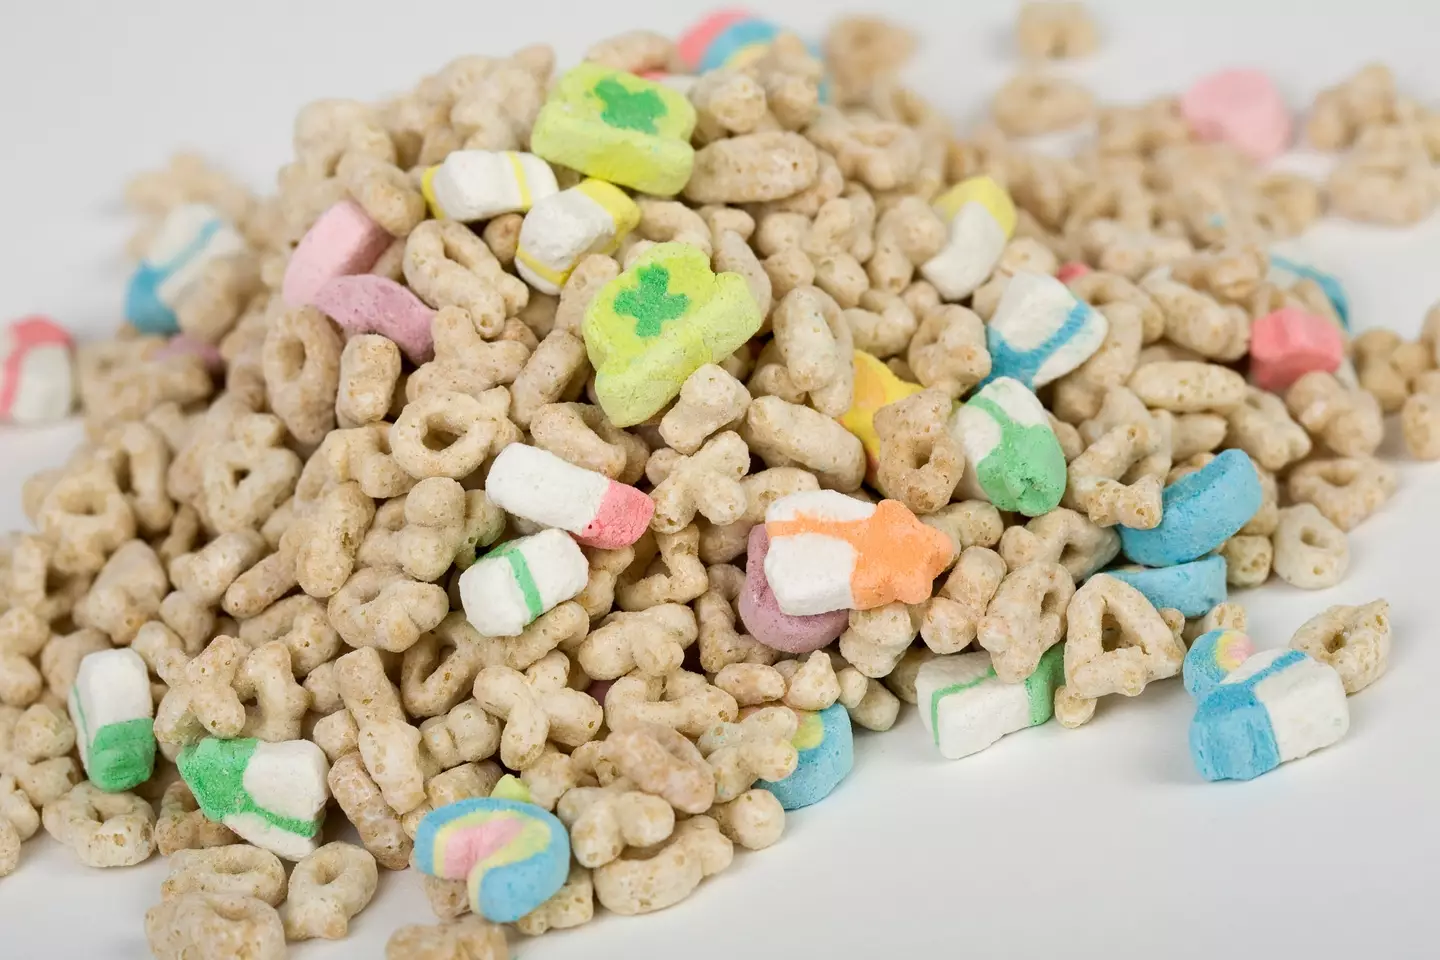 A nutrient profiling system made by Tufts University ranked Lucky Charms higher than steak, but it's not official US government data.